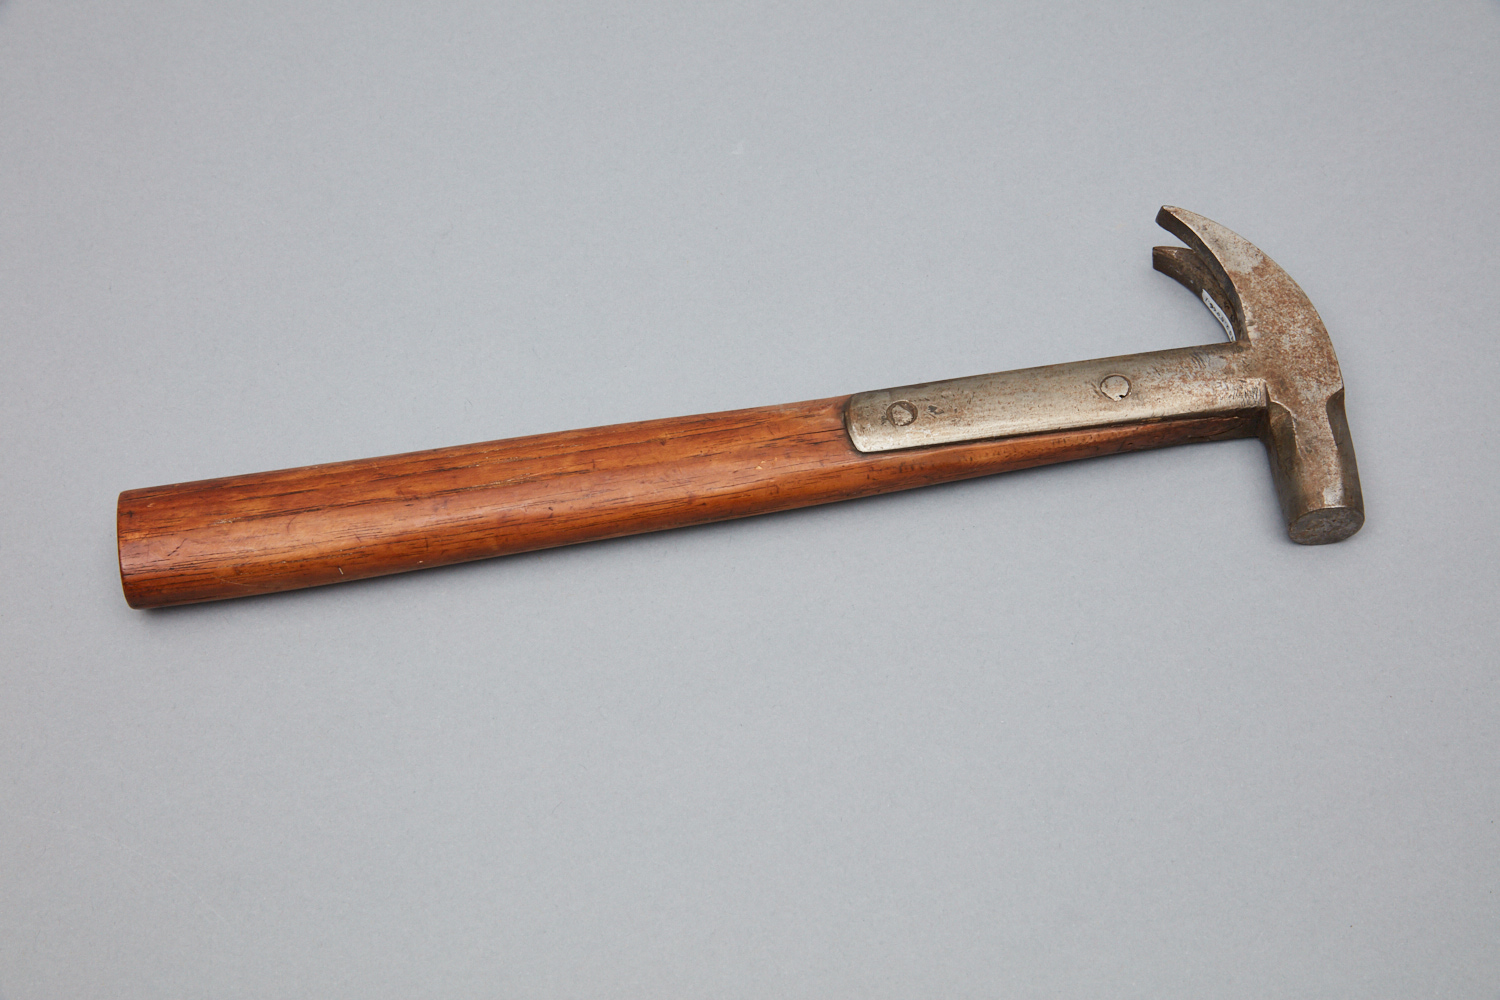 A wooden hammer with a wooden handle.